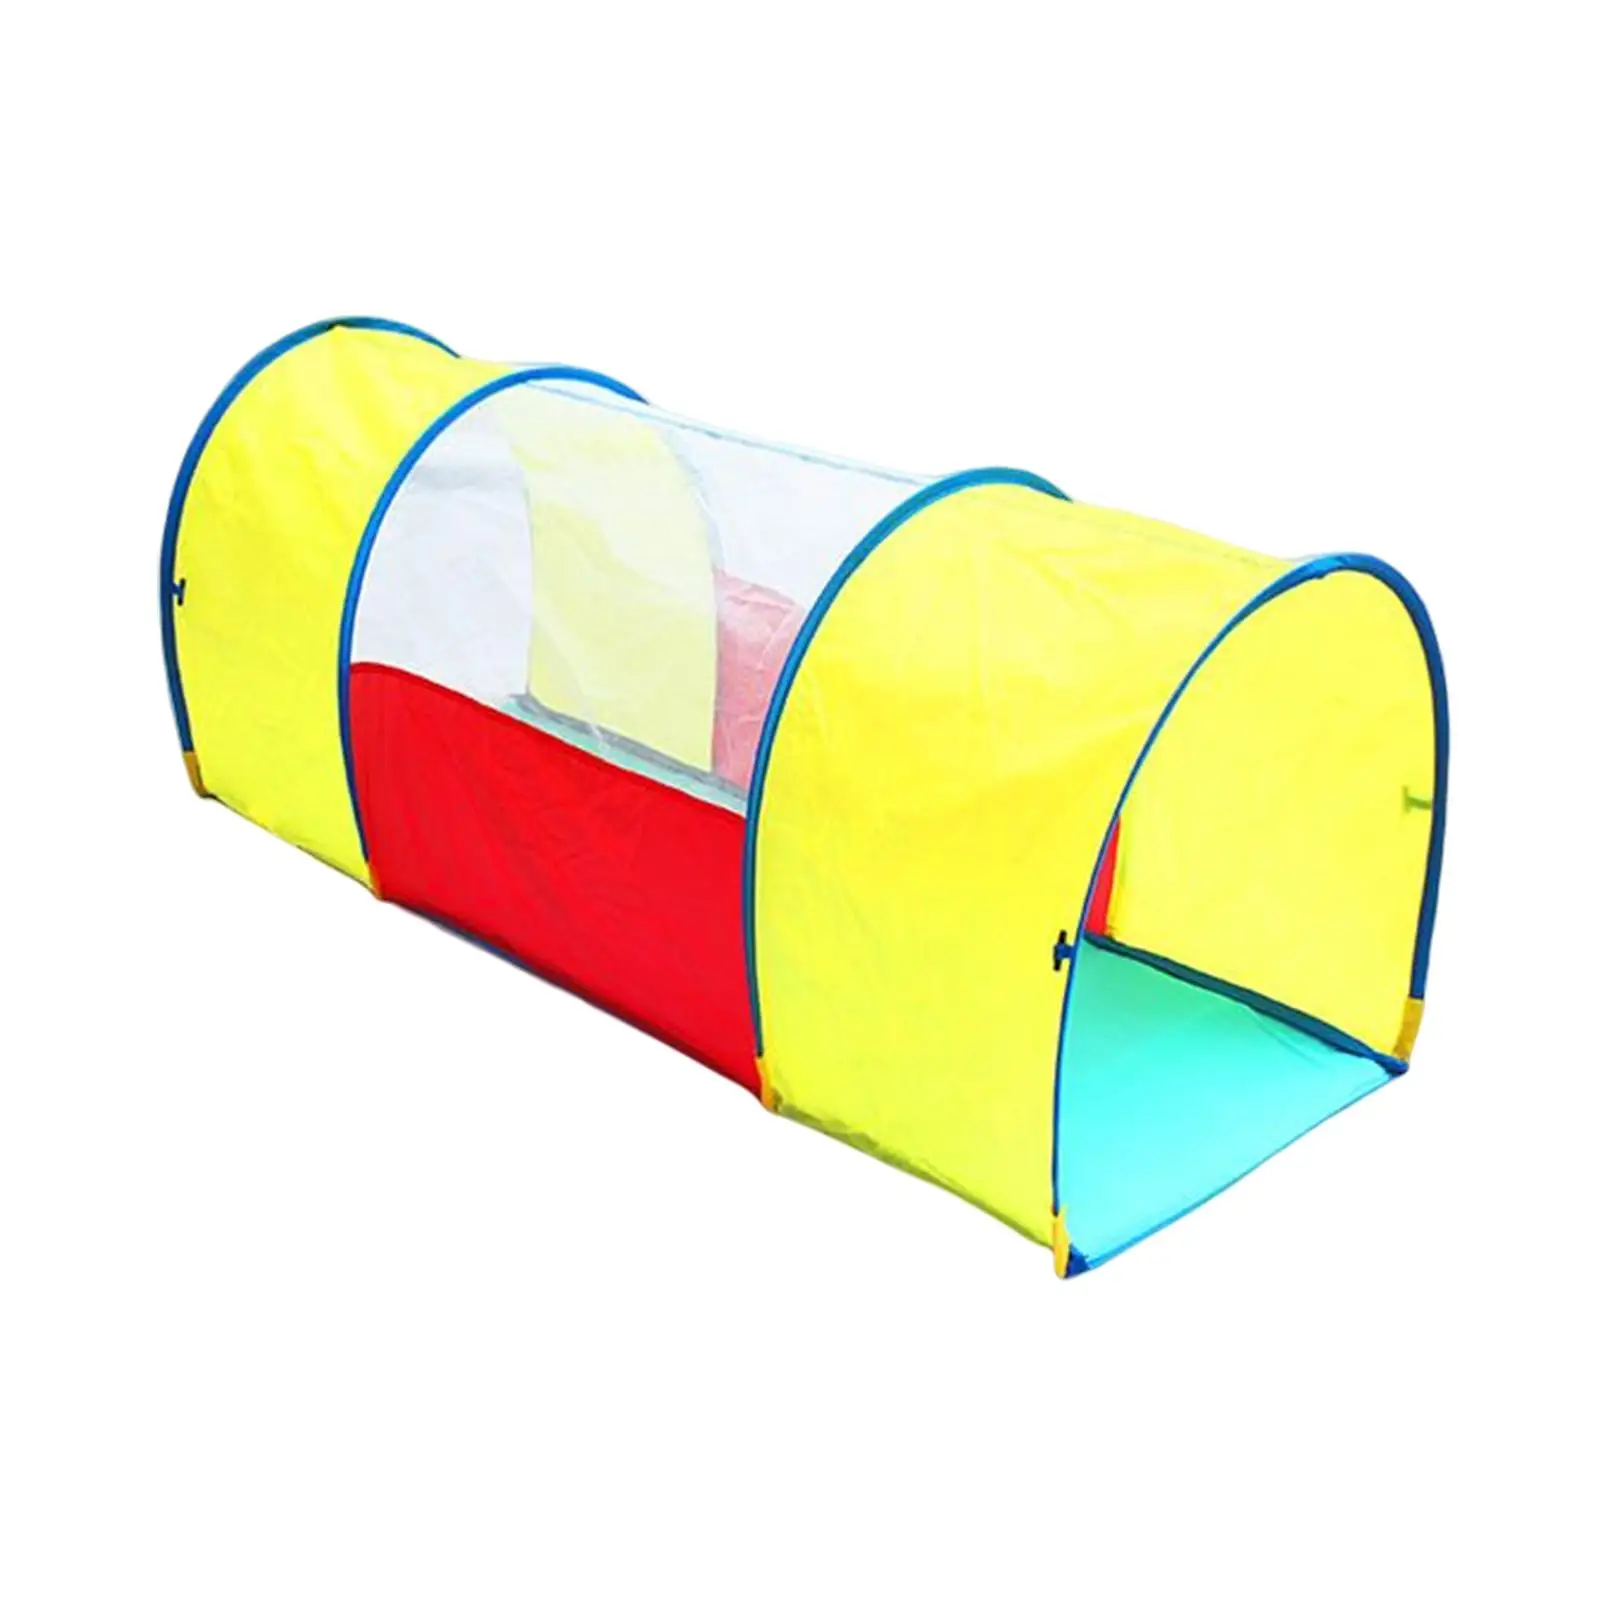 Portable Play Tent Toy Indoor Outdoor Toy Climbing Toy Collapsible Tunnel Arch Tunnel for Children Girls Boys Toddlers Infants